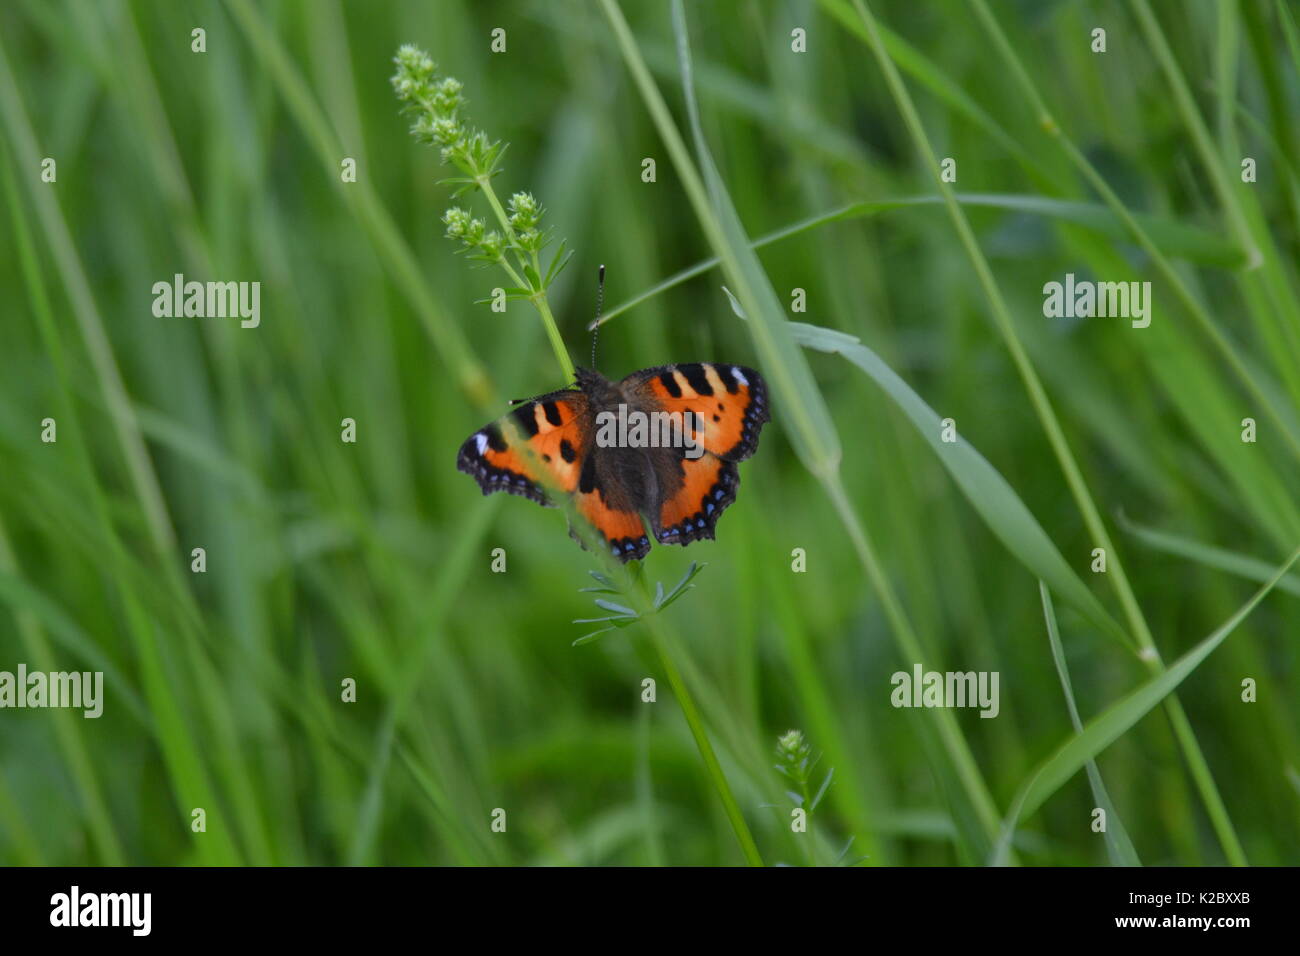 Butterfly on grass Stock Photo